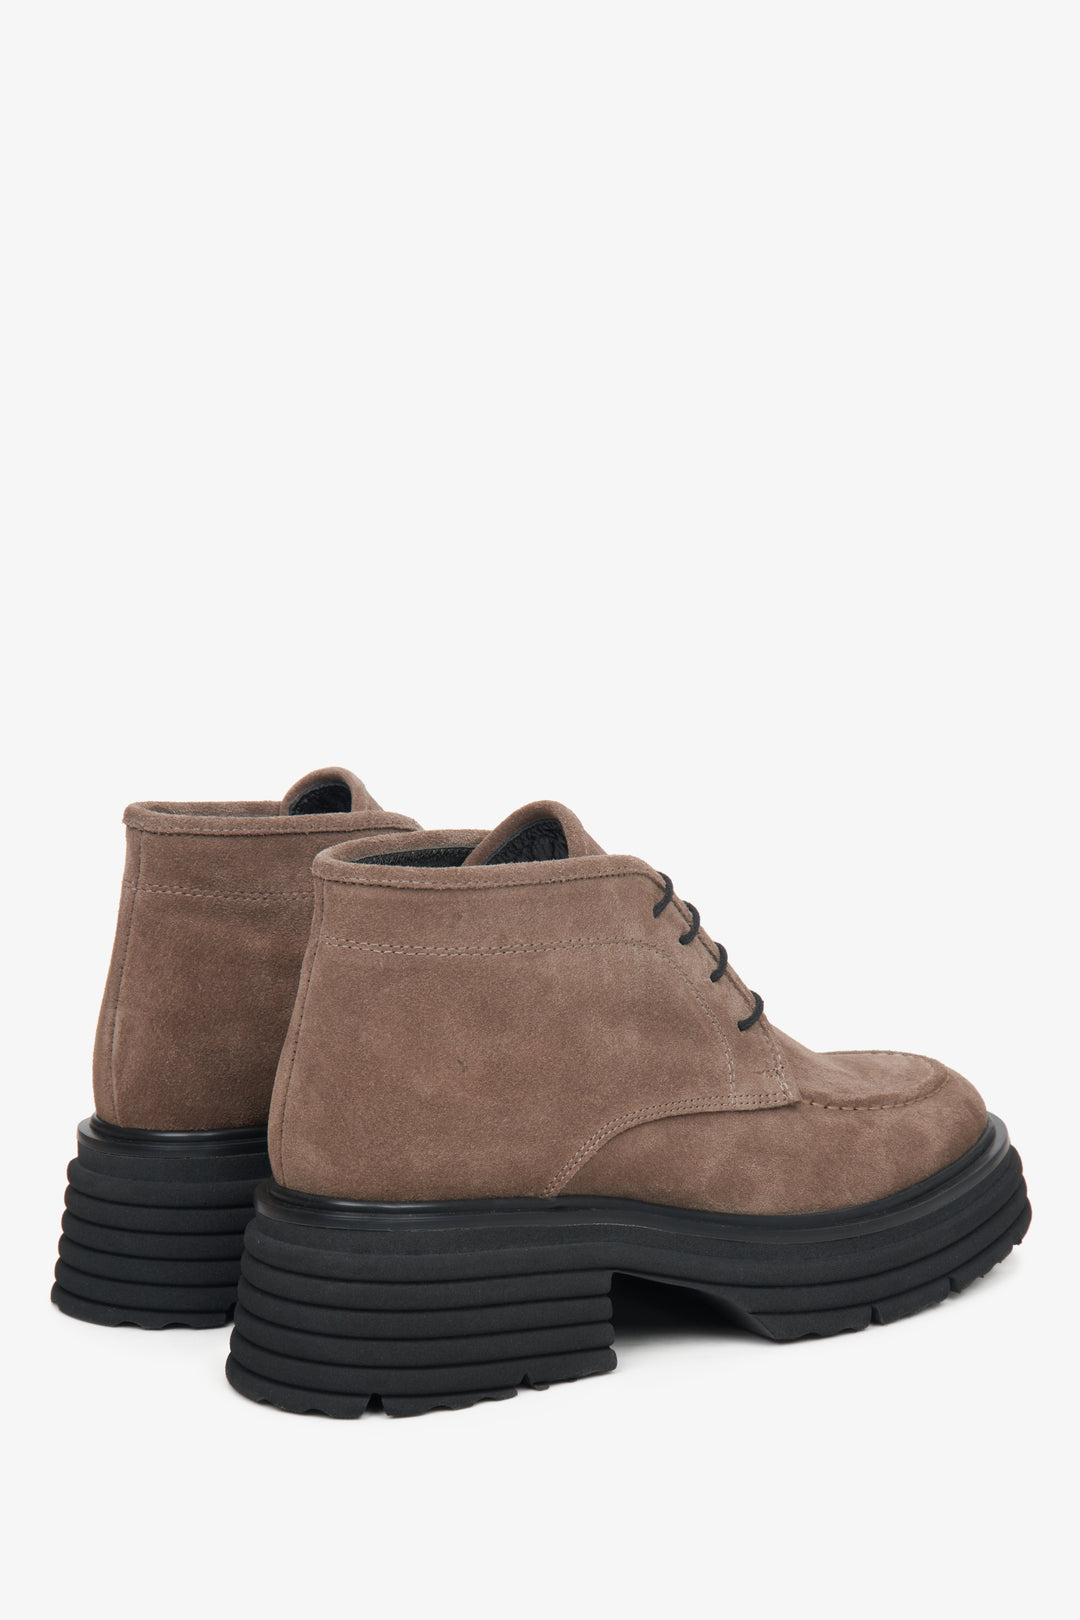 Women's suede lace-up boots by Estro - close-up on the heel and side line of the boot